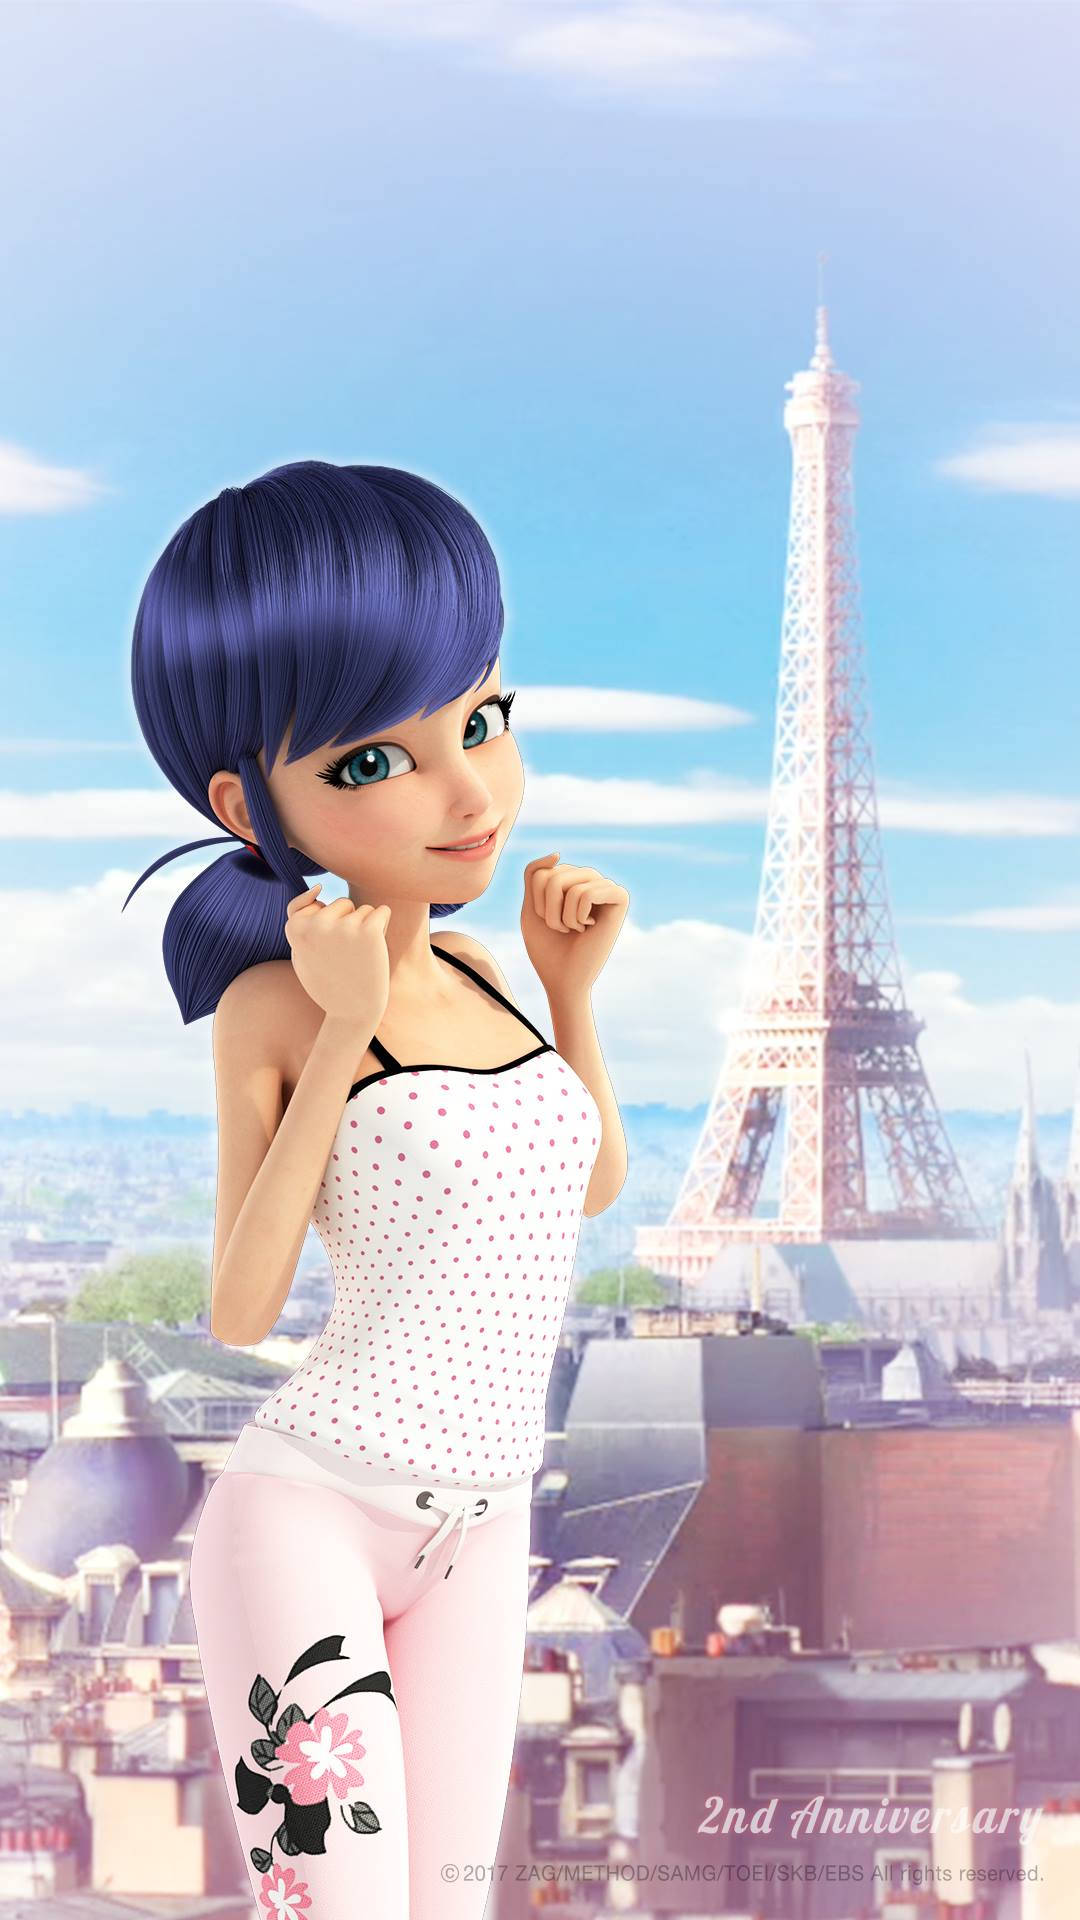 Marinette In New Official Image